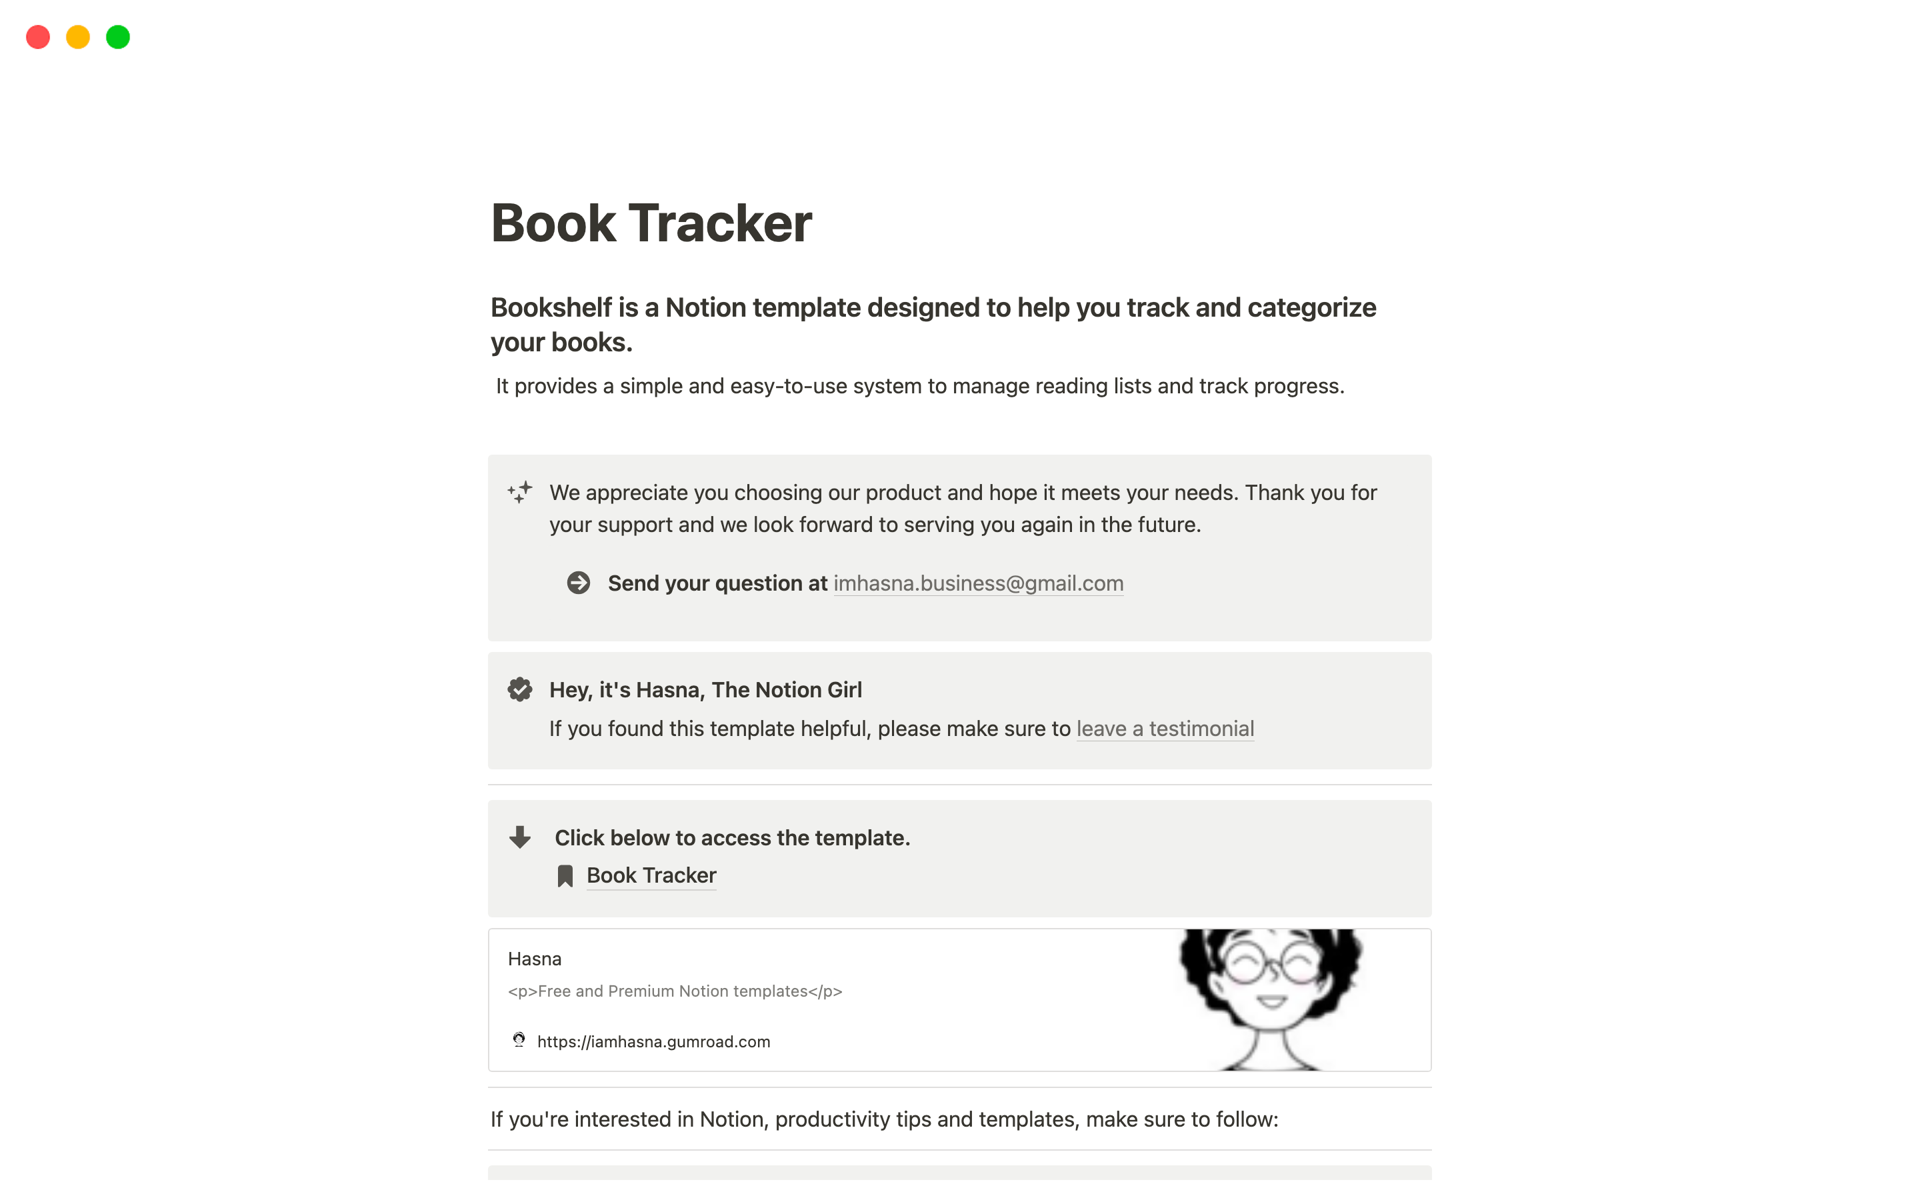 Bookshelf is a Notion template designed to help you track and categorize your books.